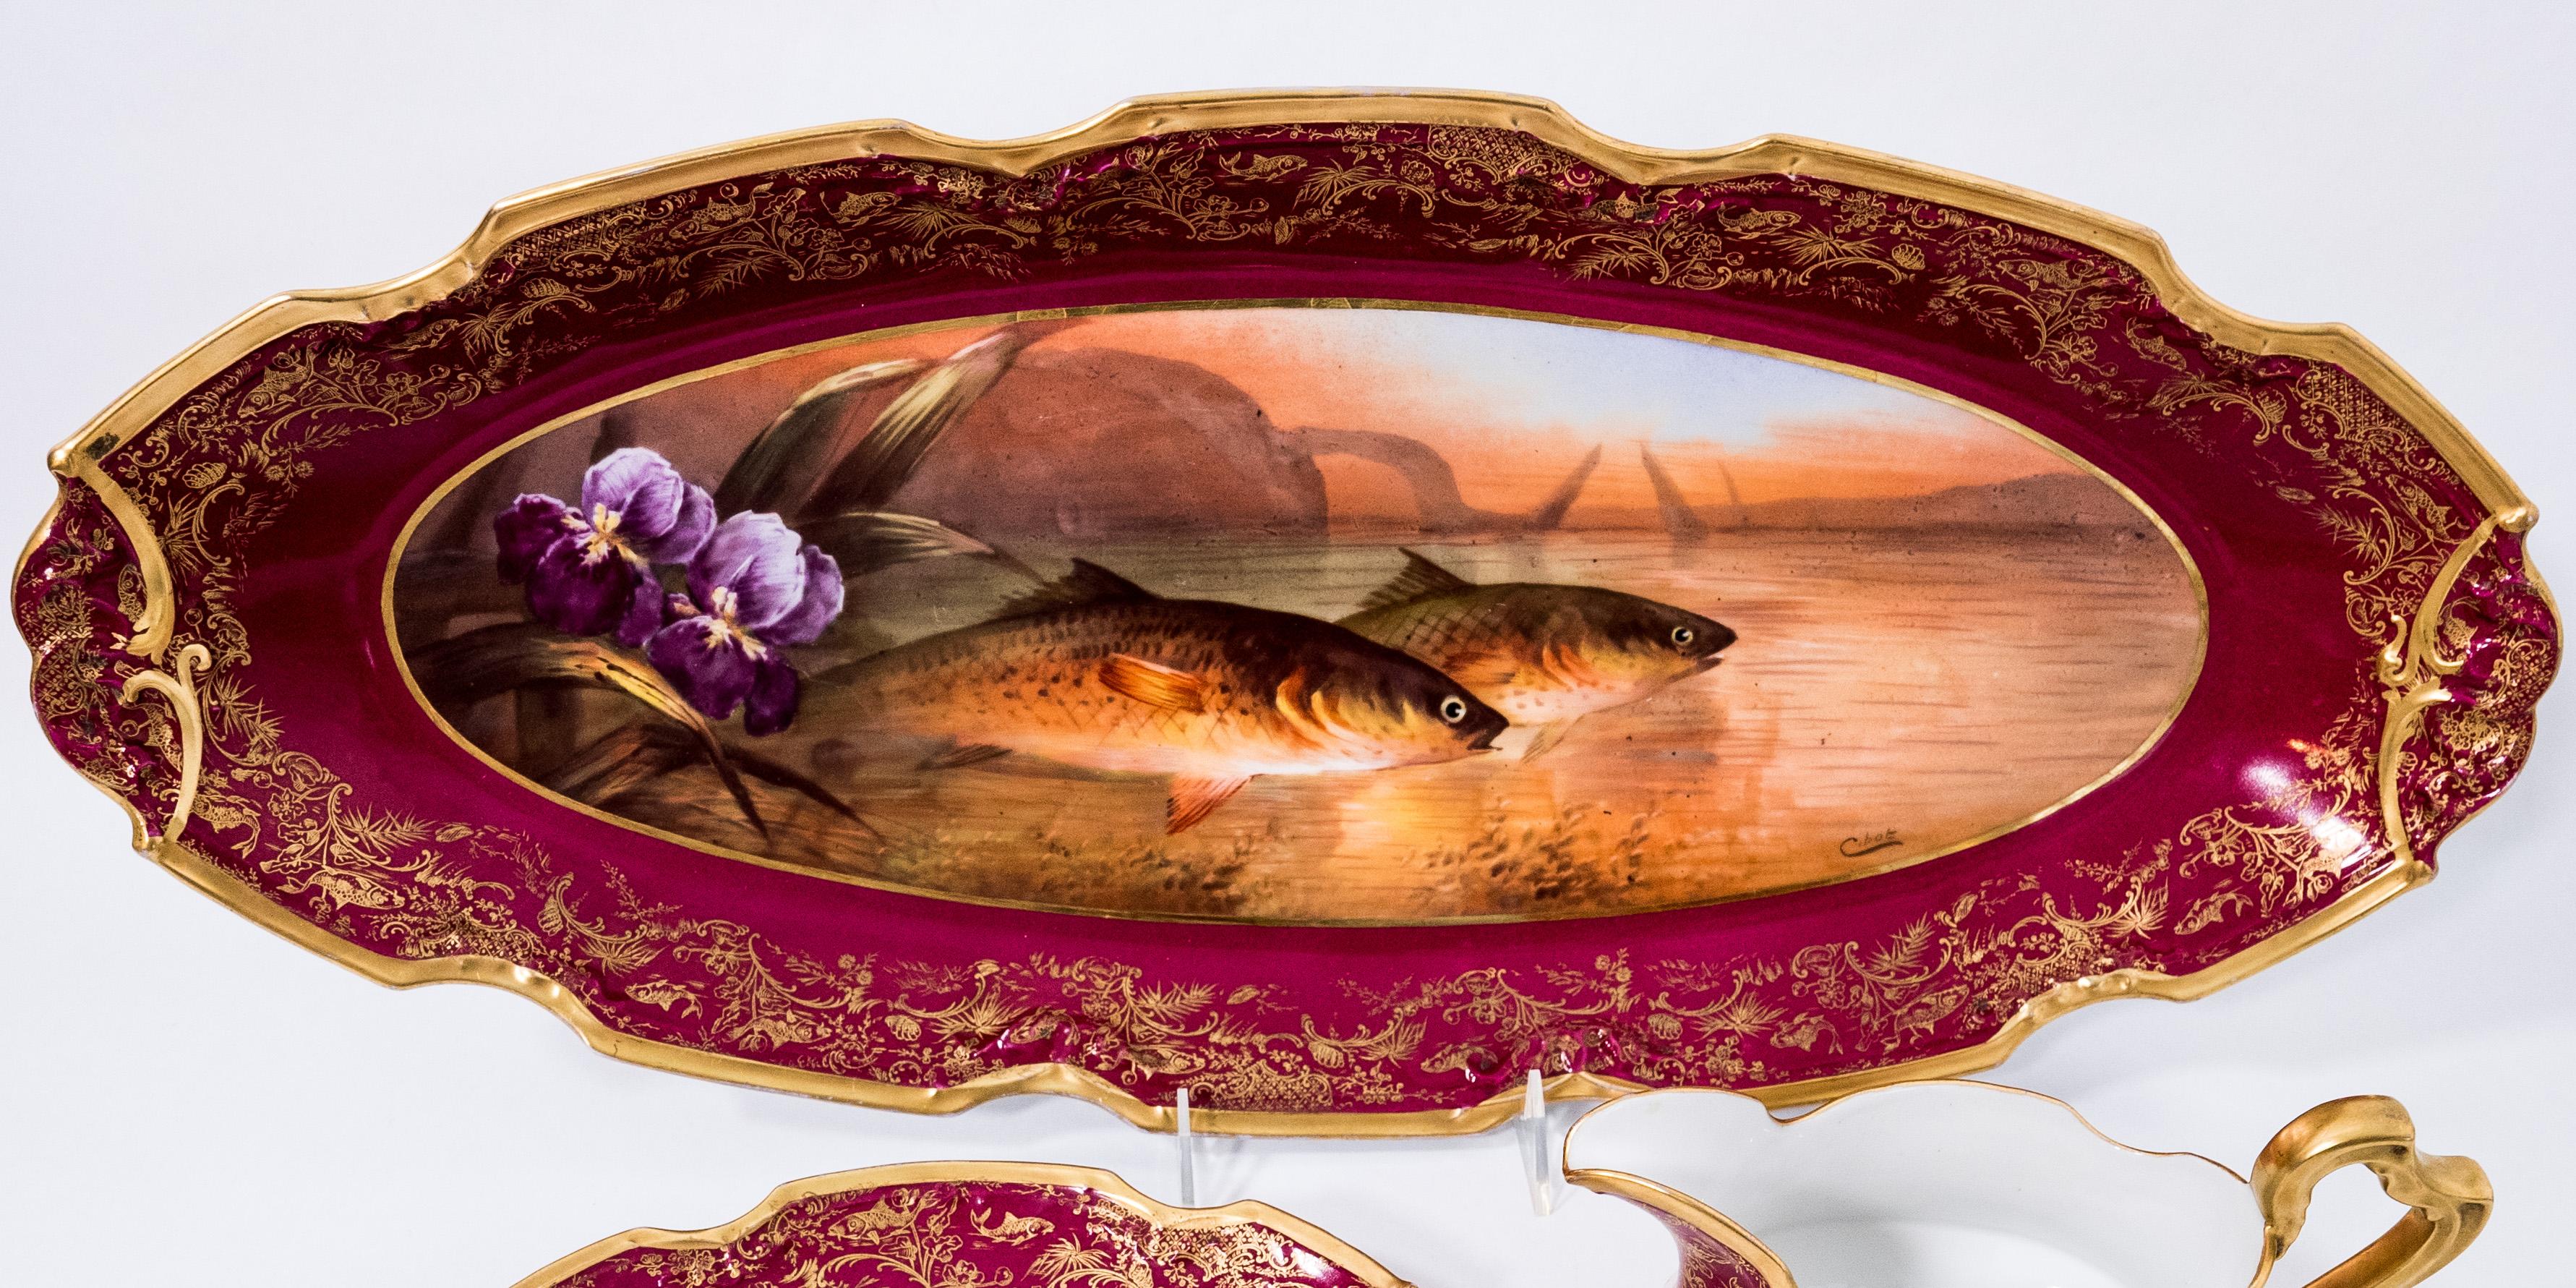 Hand-Crafted 15 Piece Fish Set with Platter, Sauce Boat & 12 Plates, Antique Limoges Ruby